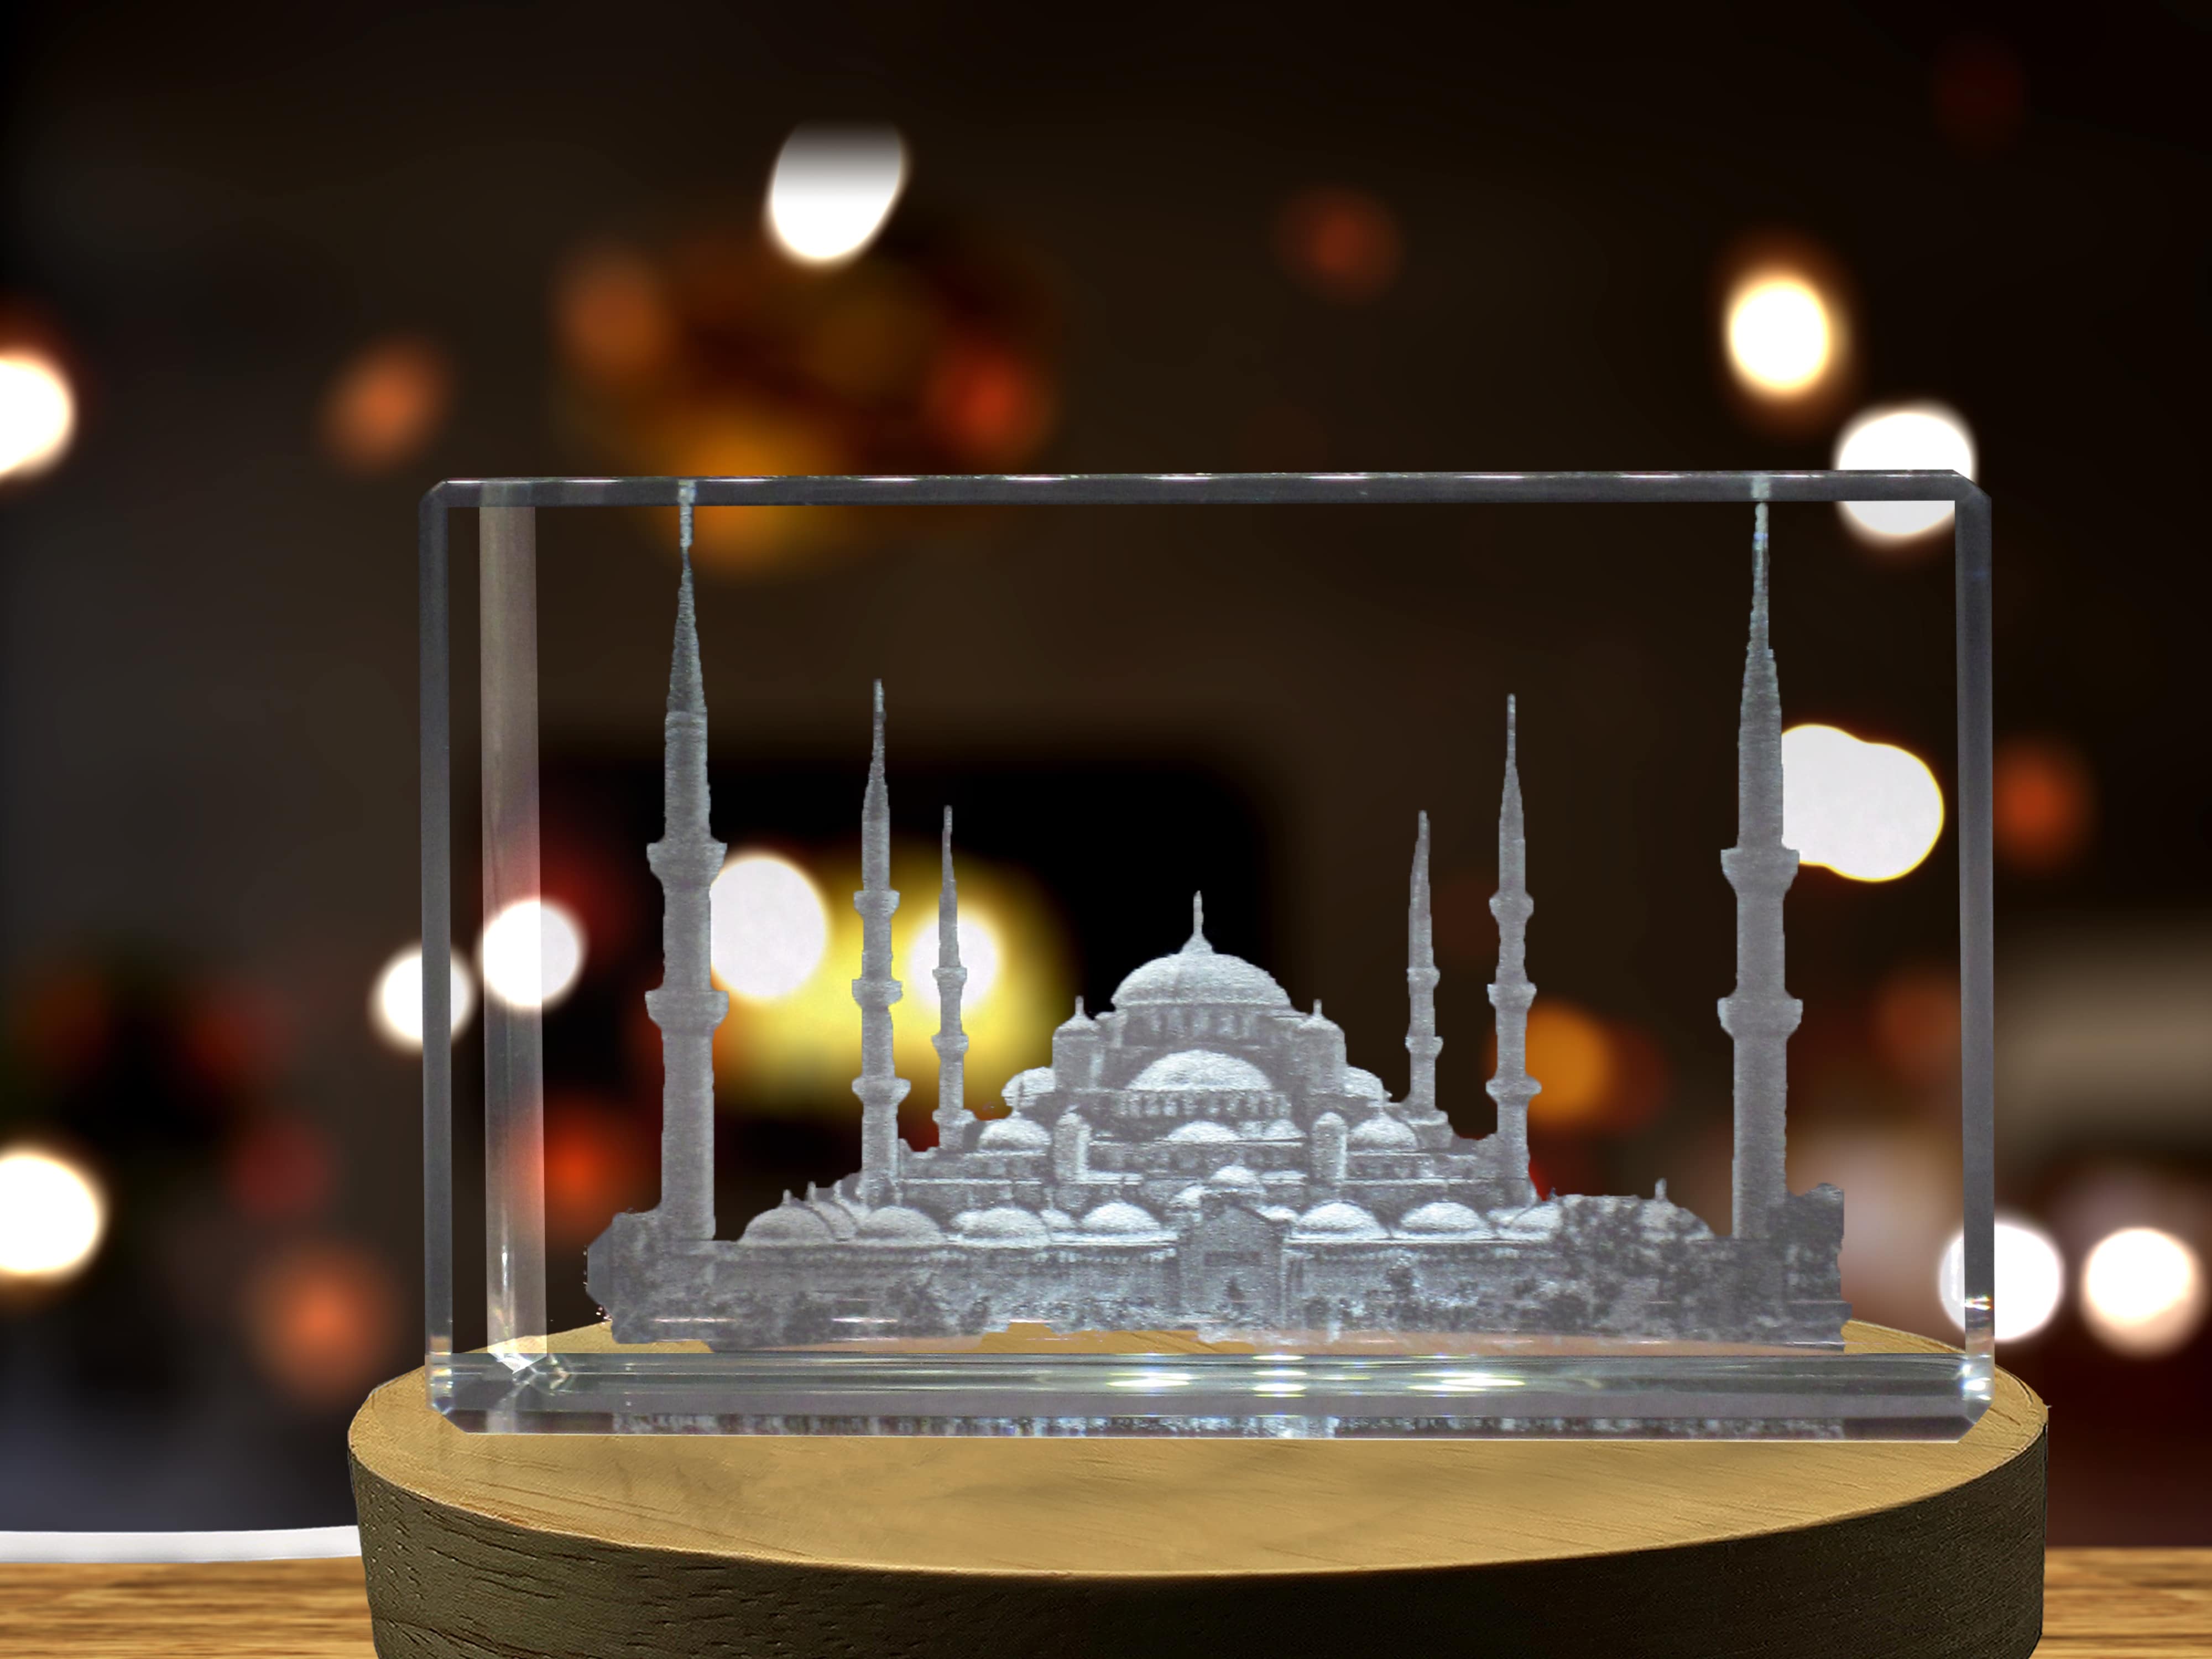 Sultan Ahmed Mosque 3D Engraved Crystal Keepsake Souvenir A&B Crystal Collection